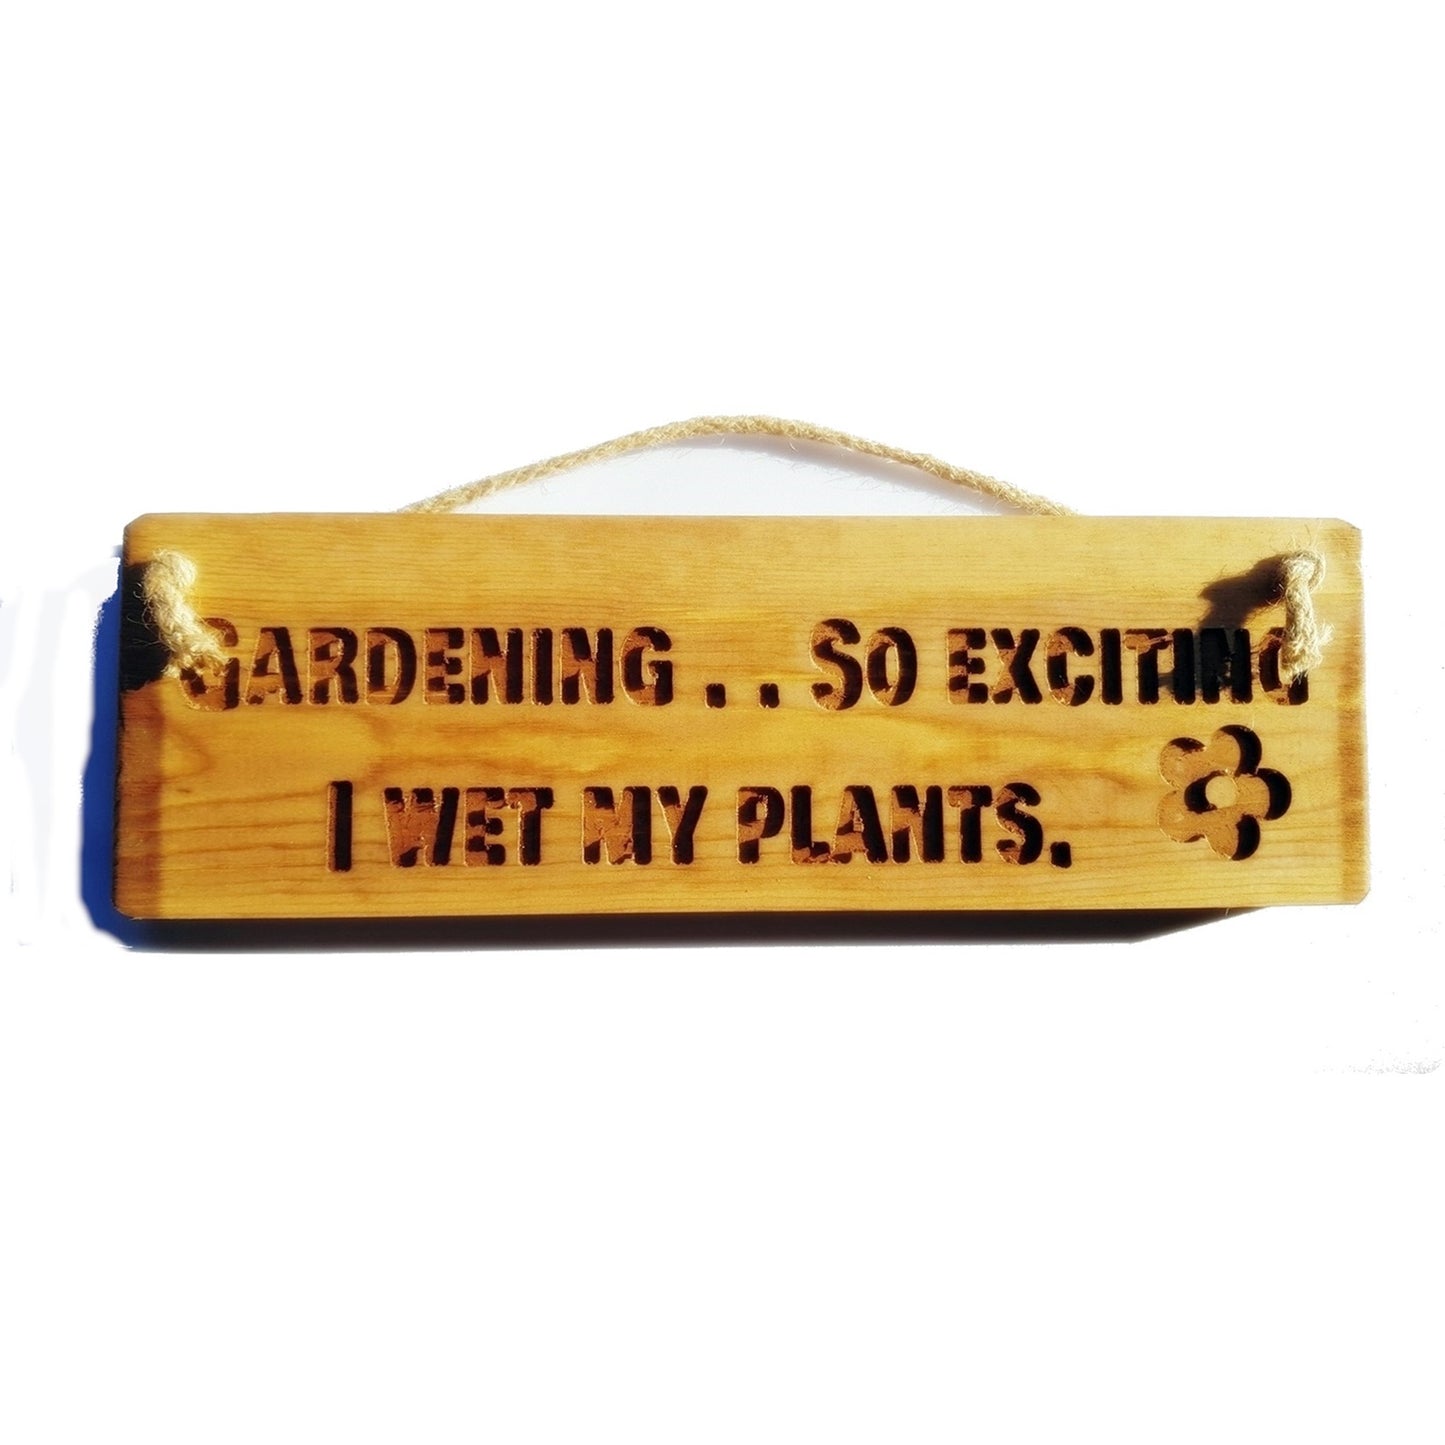 Wooden engraved Rustic 30cm Sign Natural  "Gardening ... So excited I wet my plants"